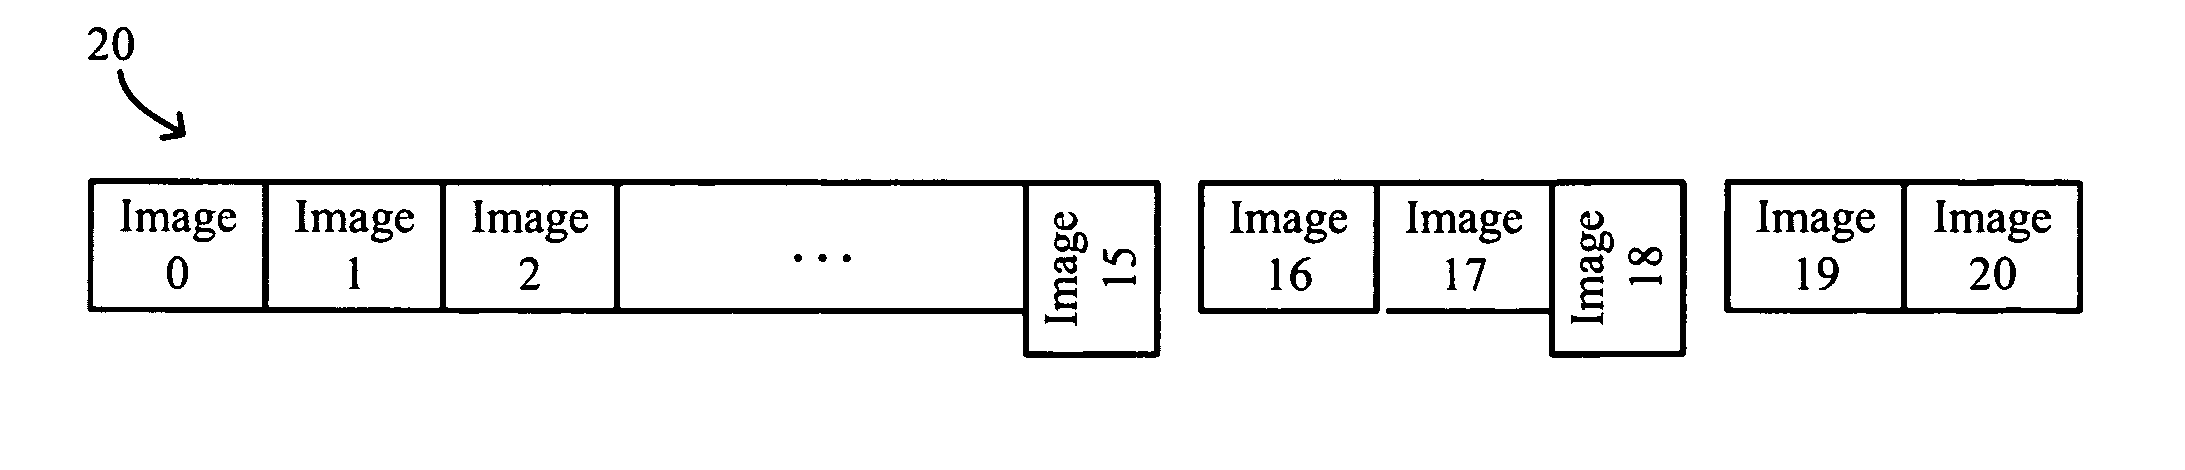 Transferring, processing and displaying multiple images using single transfer request